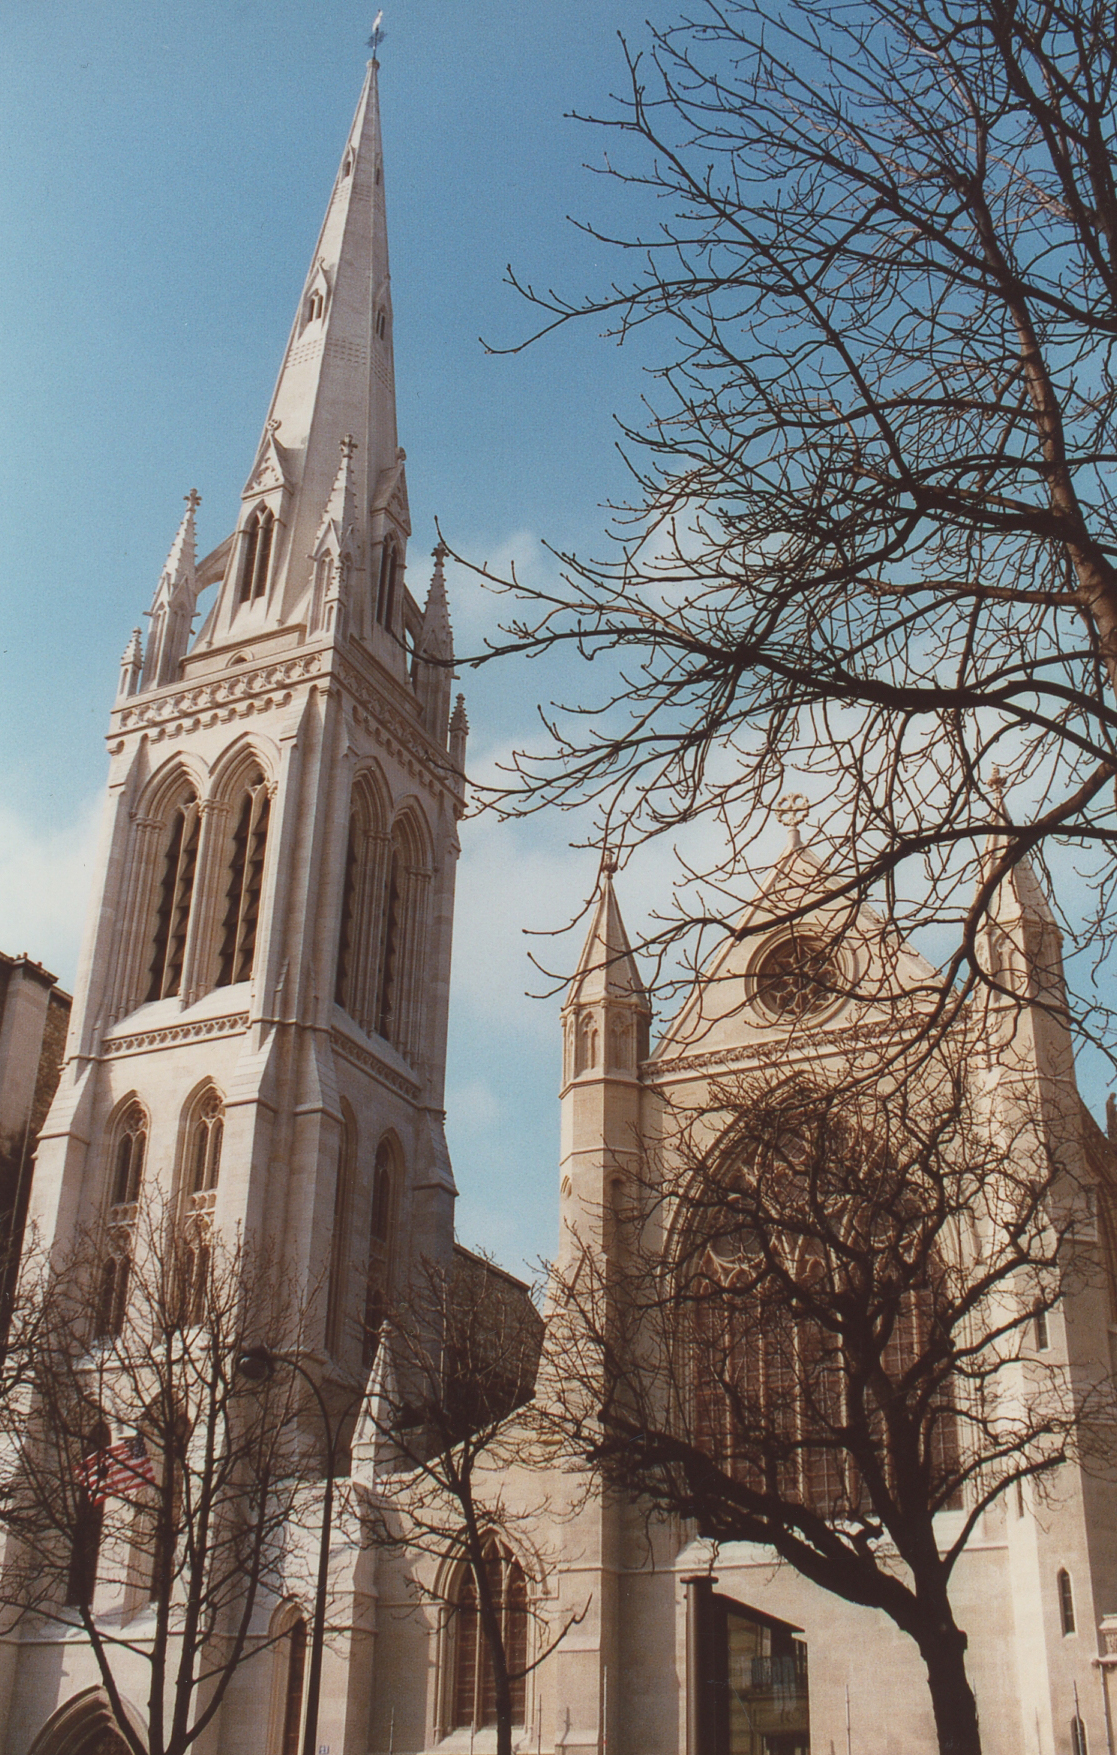 The American Cathedral.
Photo ©2001 Ann James Massey  